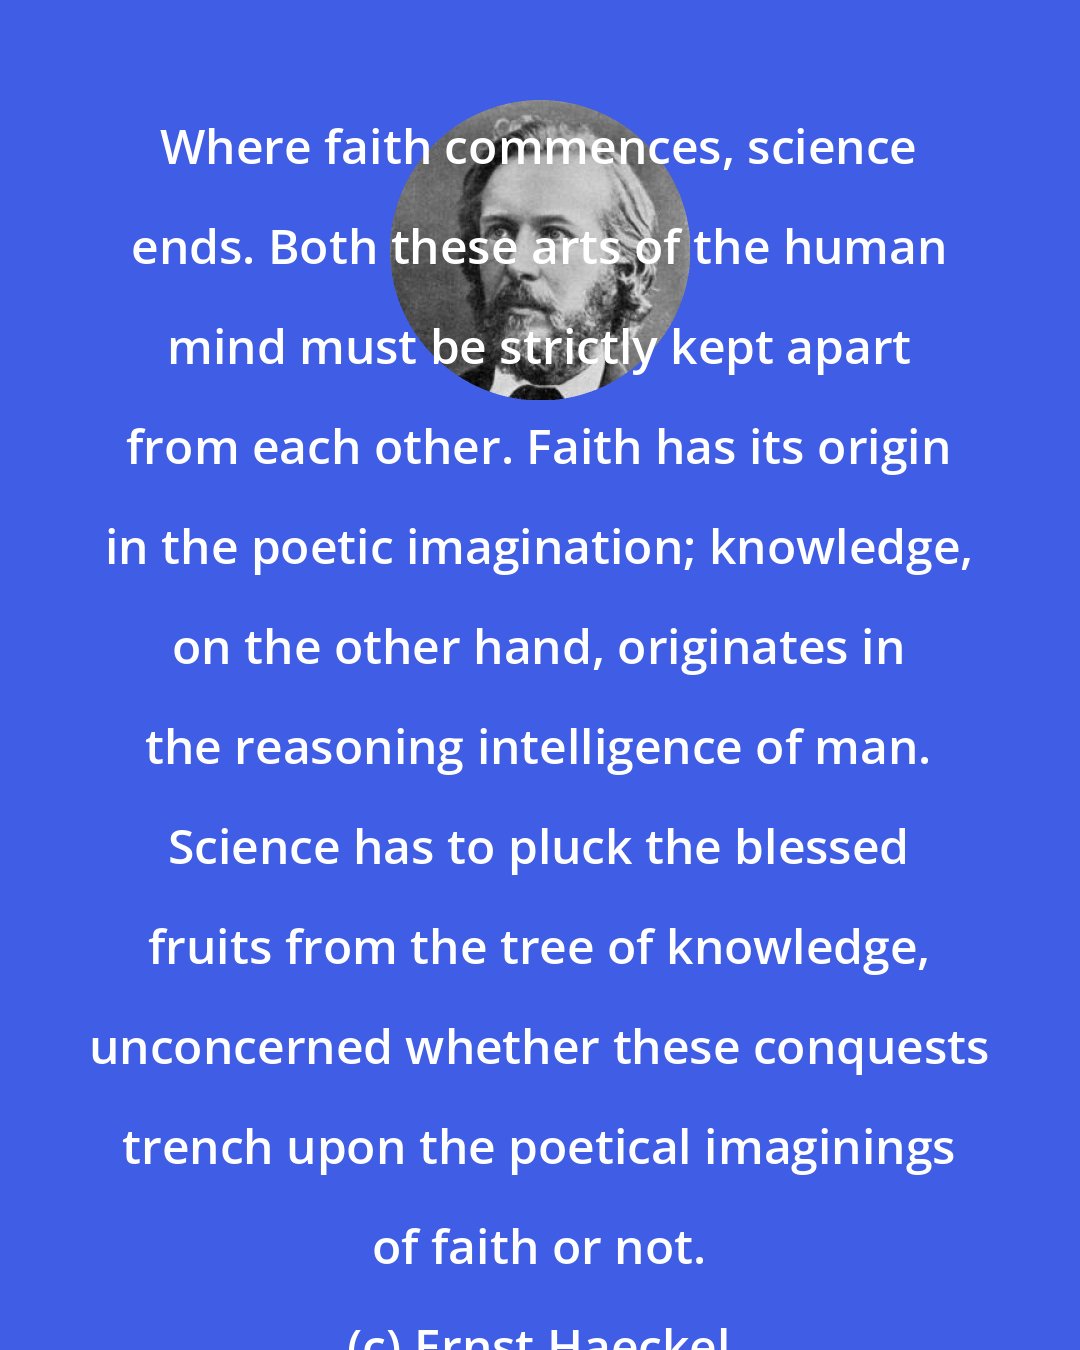 Ernst Haeckel: Where faith commences, science ends. Both these arts of the human mind must be strictly kept apart from each other. Faith has its origin in the poetic imagination; knowledge, on the other hand, originates in the reasoning intelligence of man. Science has to pluck the blessed fruits from the tree of knowledge, unconcerned whether these conquests trench upon the poetical imaginings of faith or not.